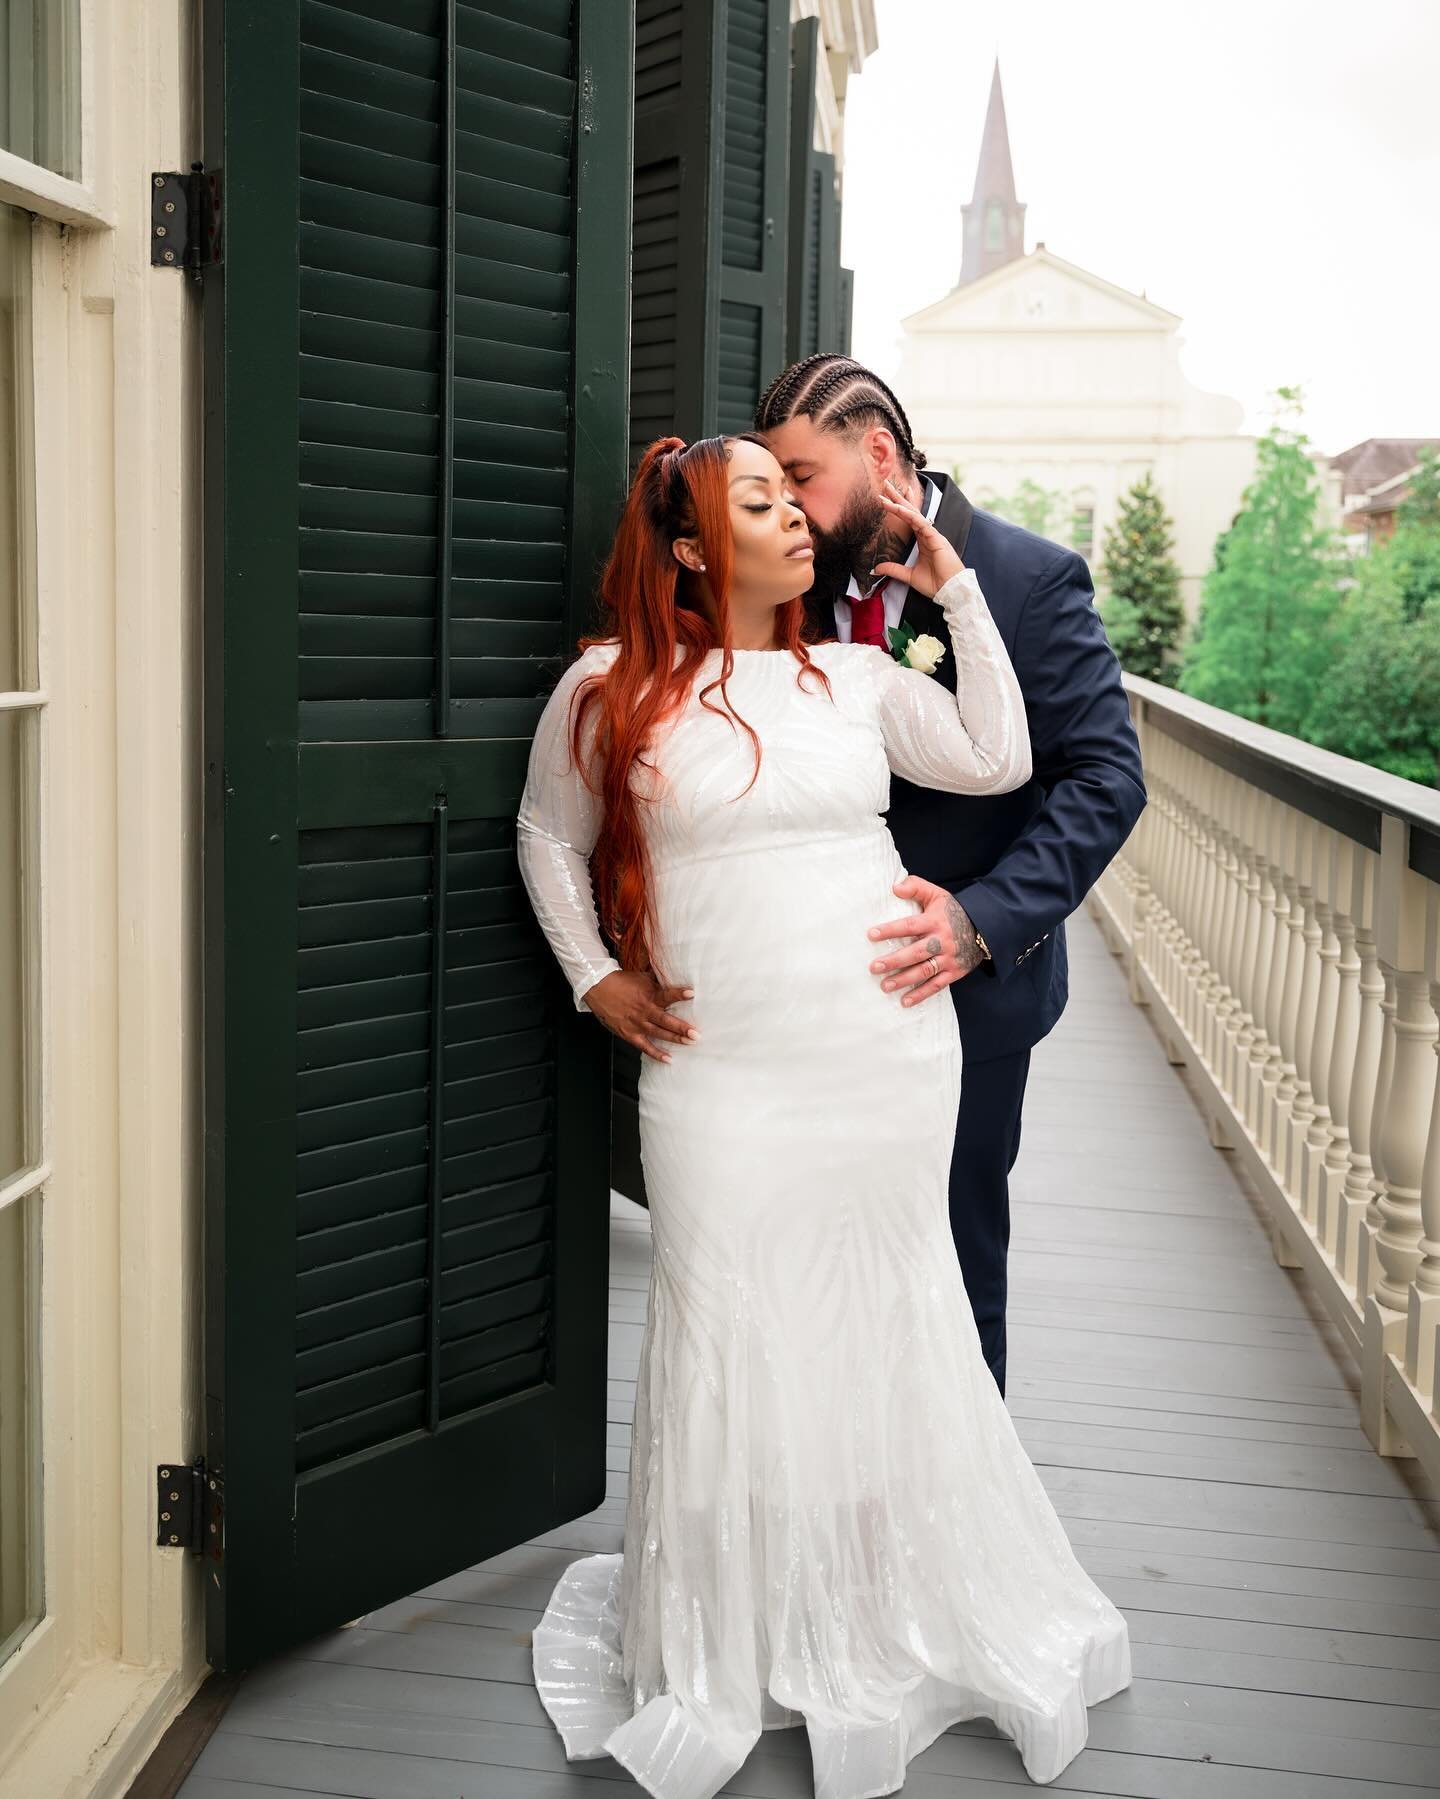 What a beautiful day to celebrate Naquita and Omar.
The amount of love these two received throughout their French Quarter elopement was so heart warming! The opportunity to capture a love story never gets old. 💍 
.
.
.
.
.
.
.
.
.
.
#neworleansphoto